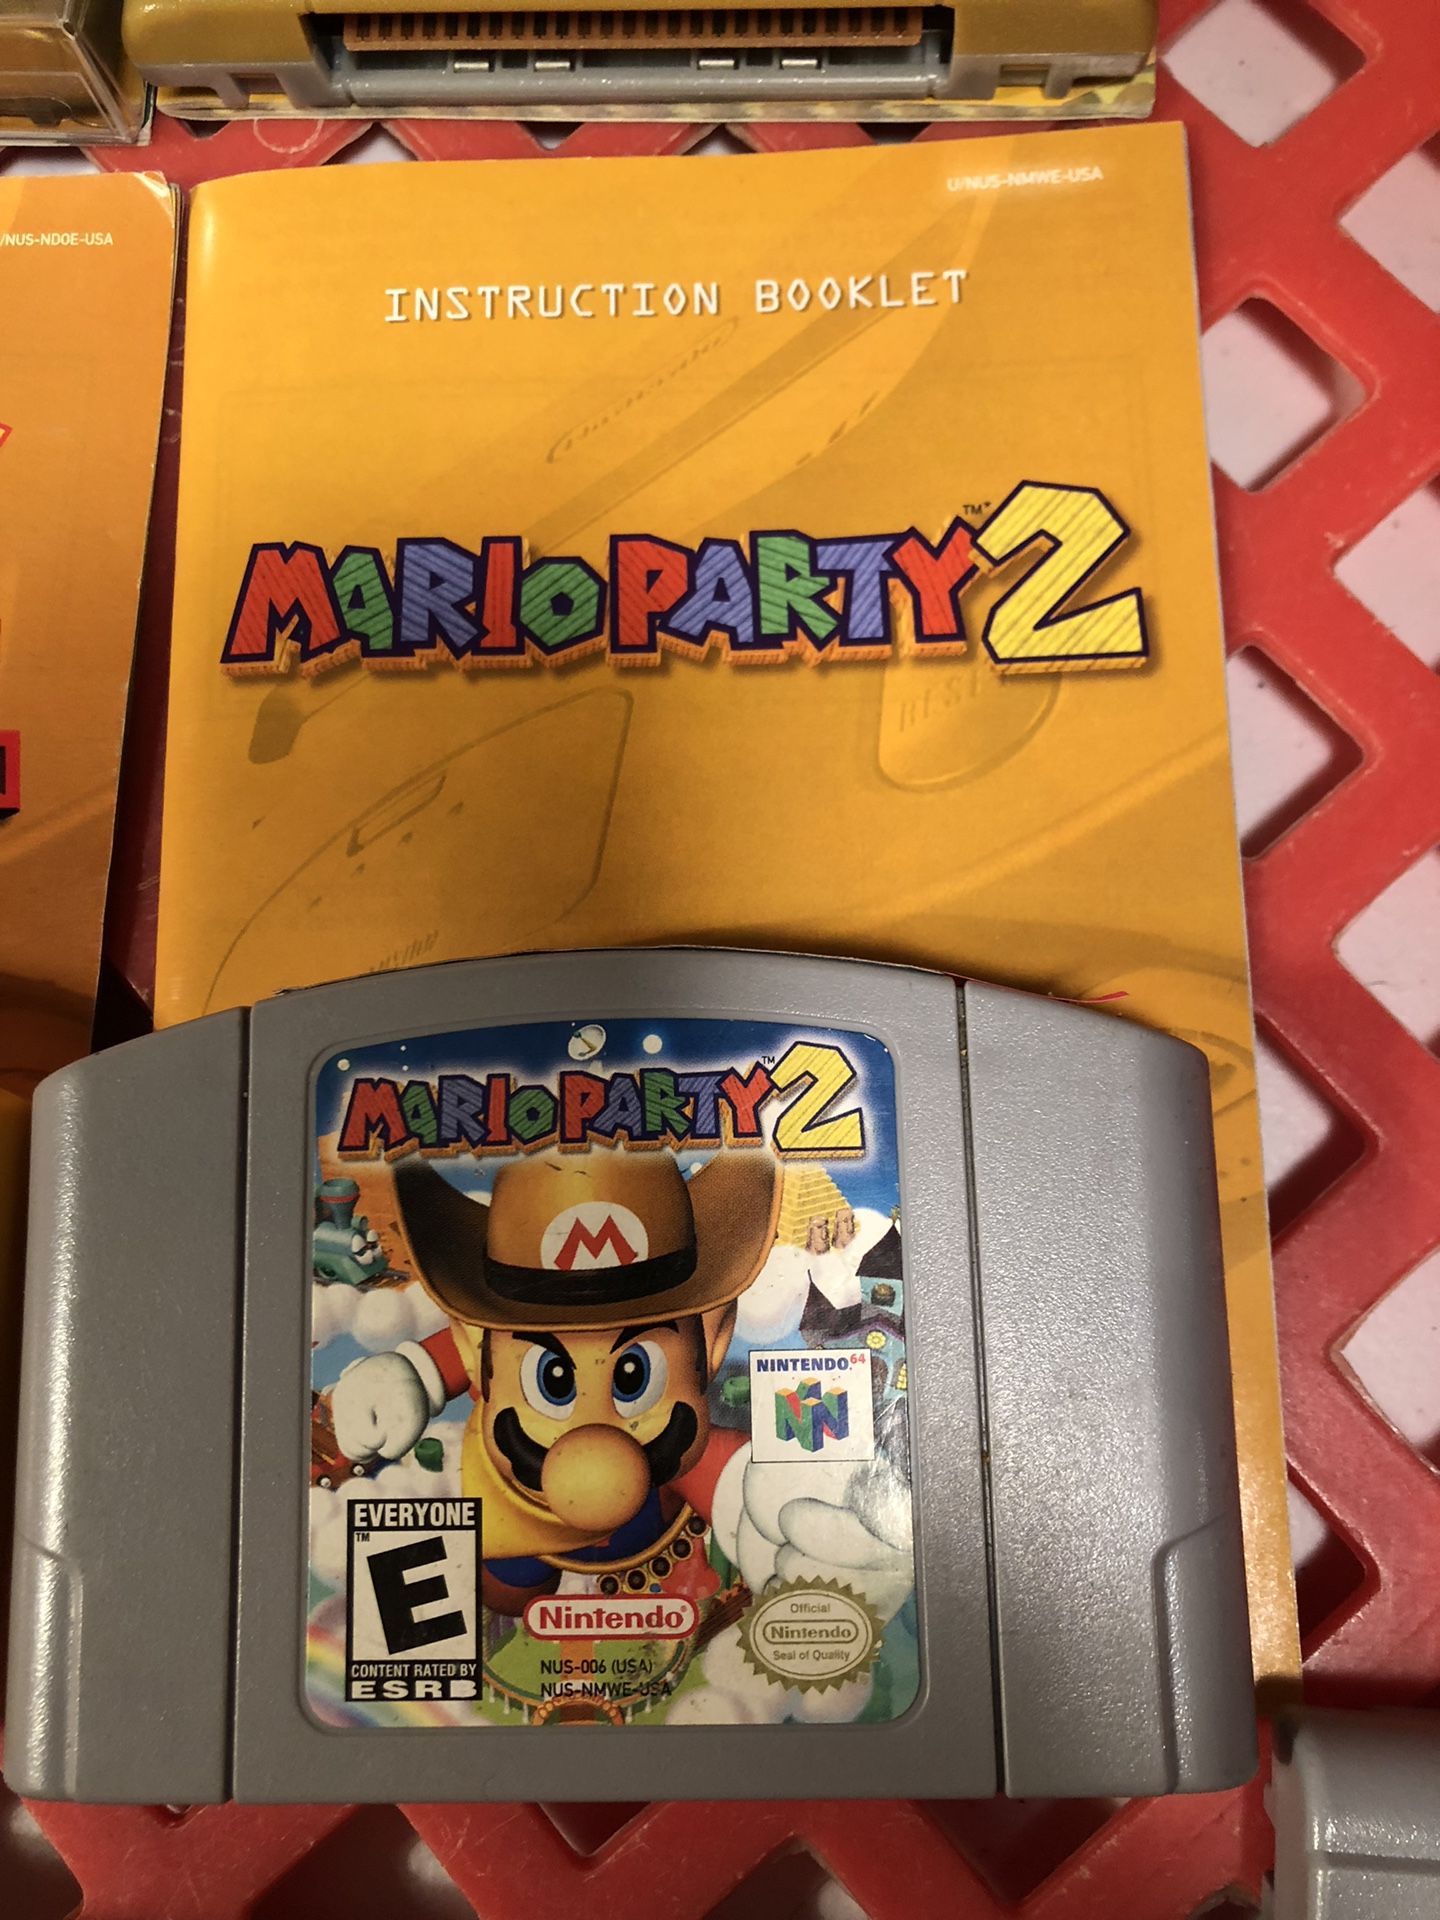 Nintendo 64 Mario party 2 video games with manual instruction booklet